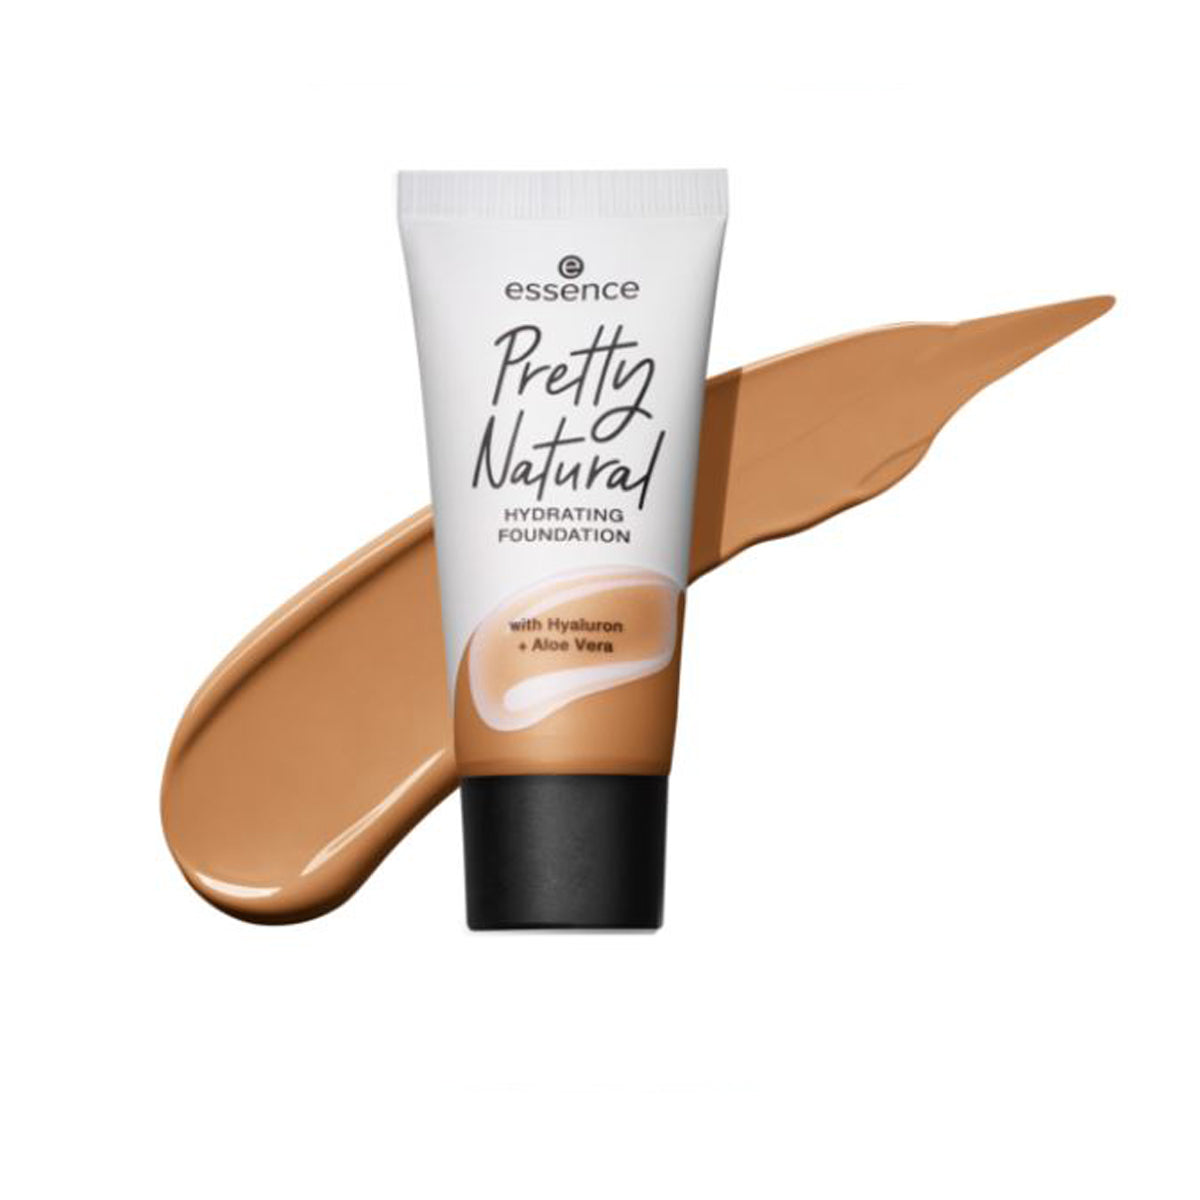 BASE DE MAQUILLAJE PRETTY NATURAL HYDRATING OUTLET - ESSENCE